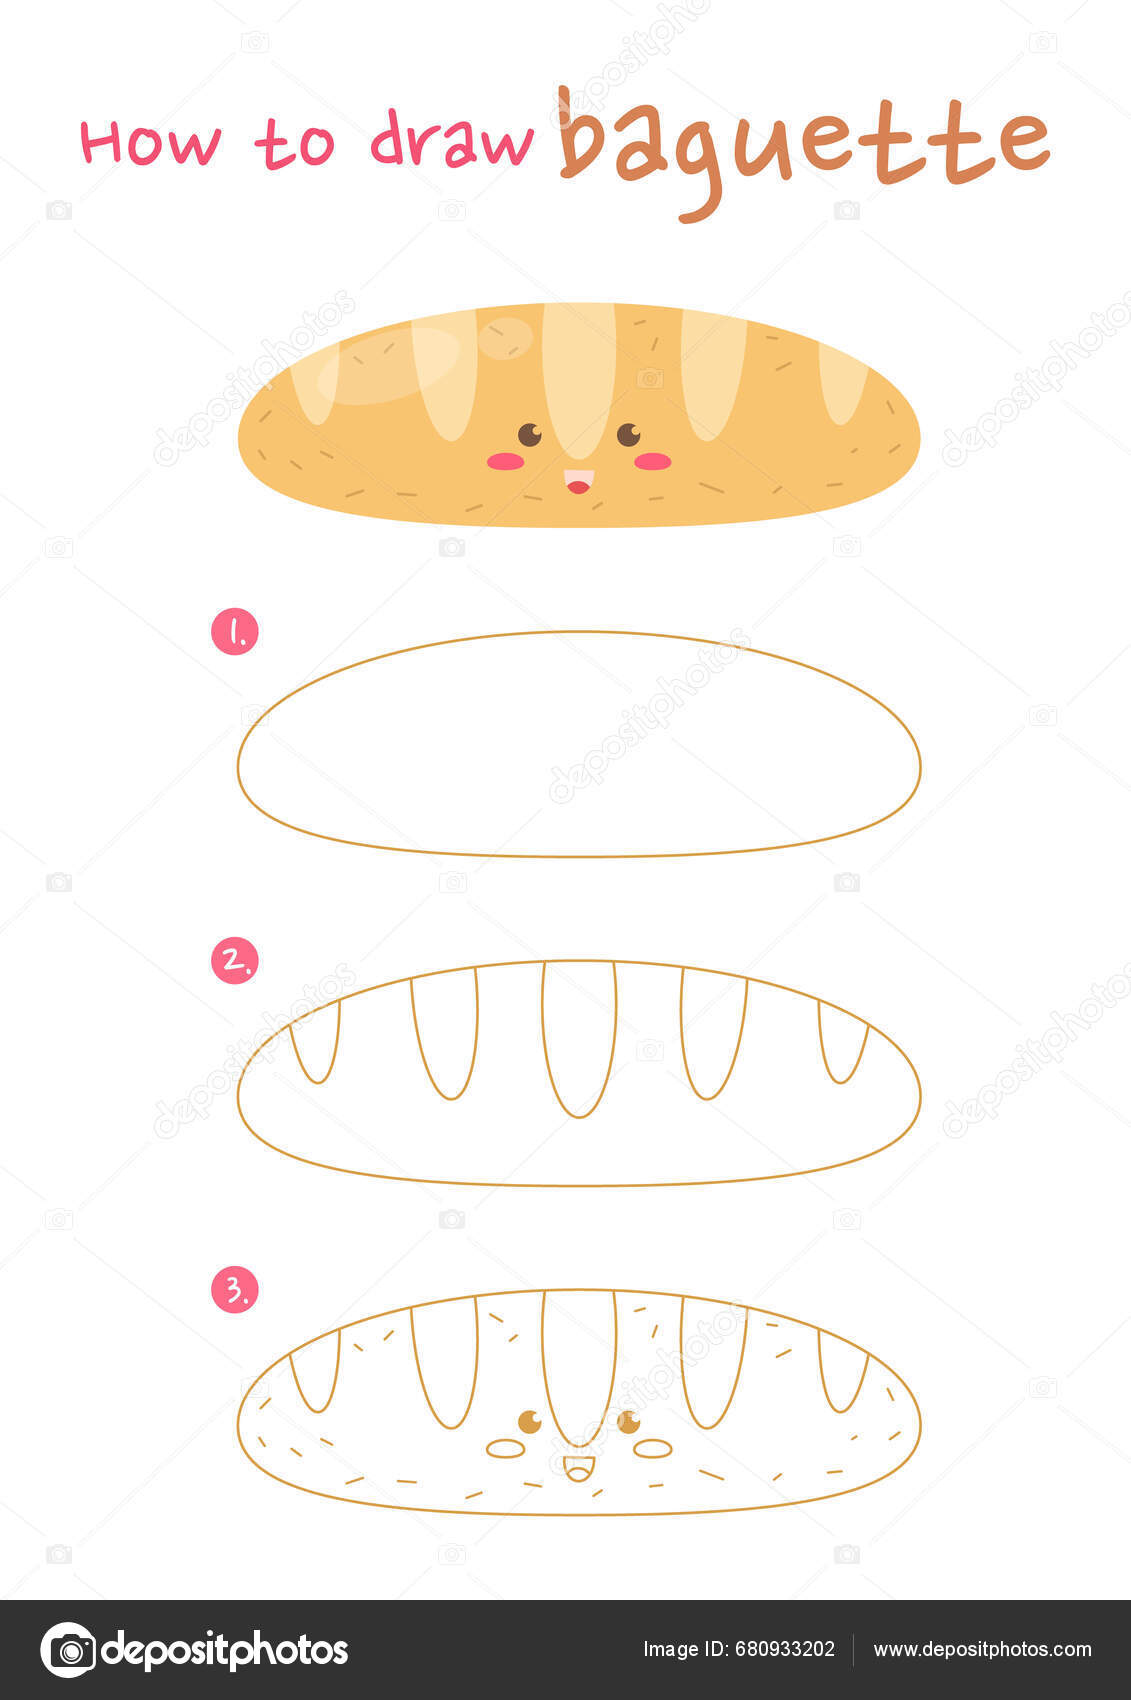 How To Draw Bread Step by Step - [6 Easy Phase] - [Emoji]